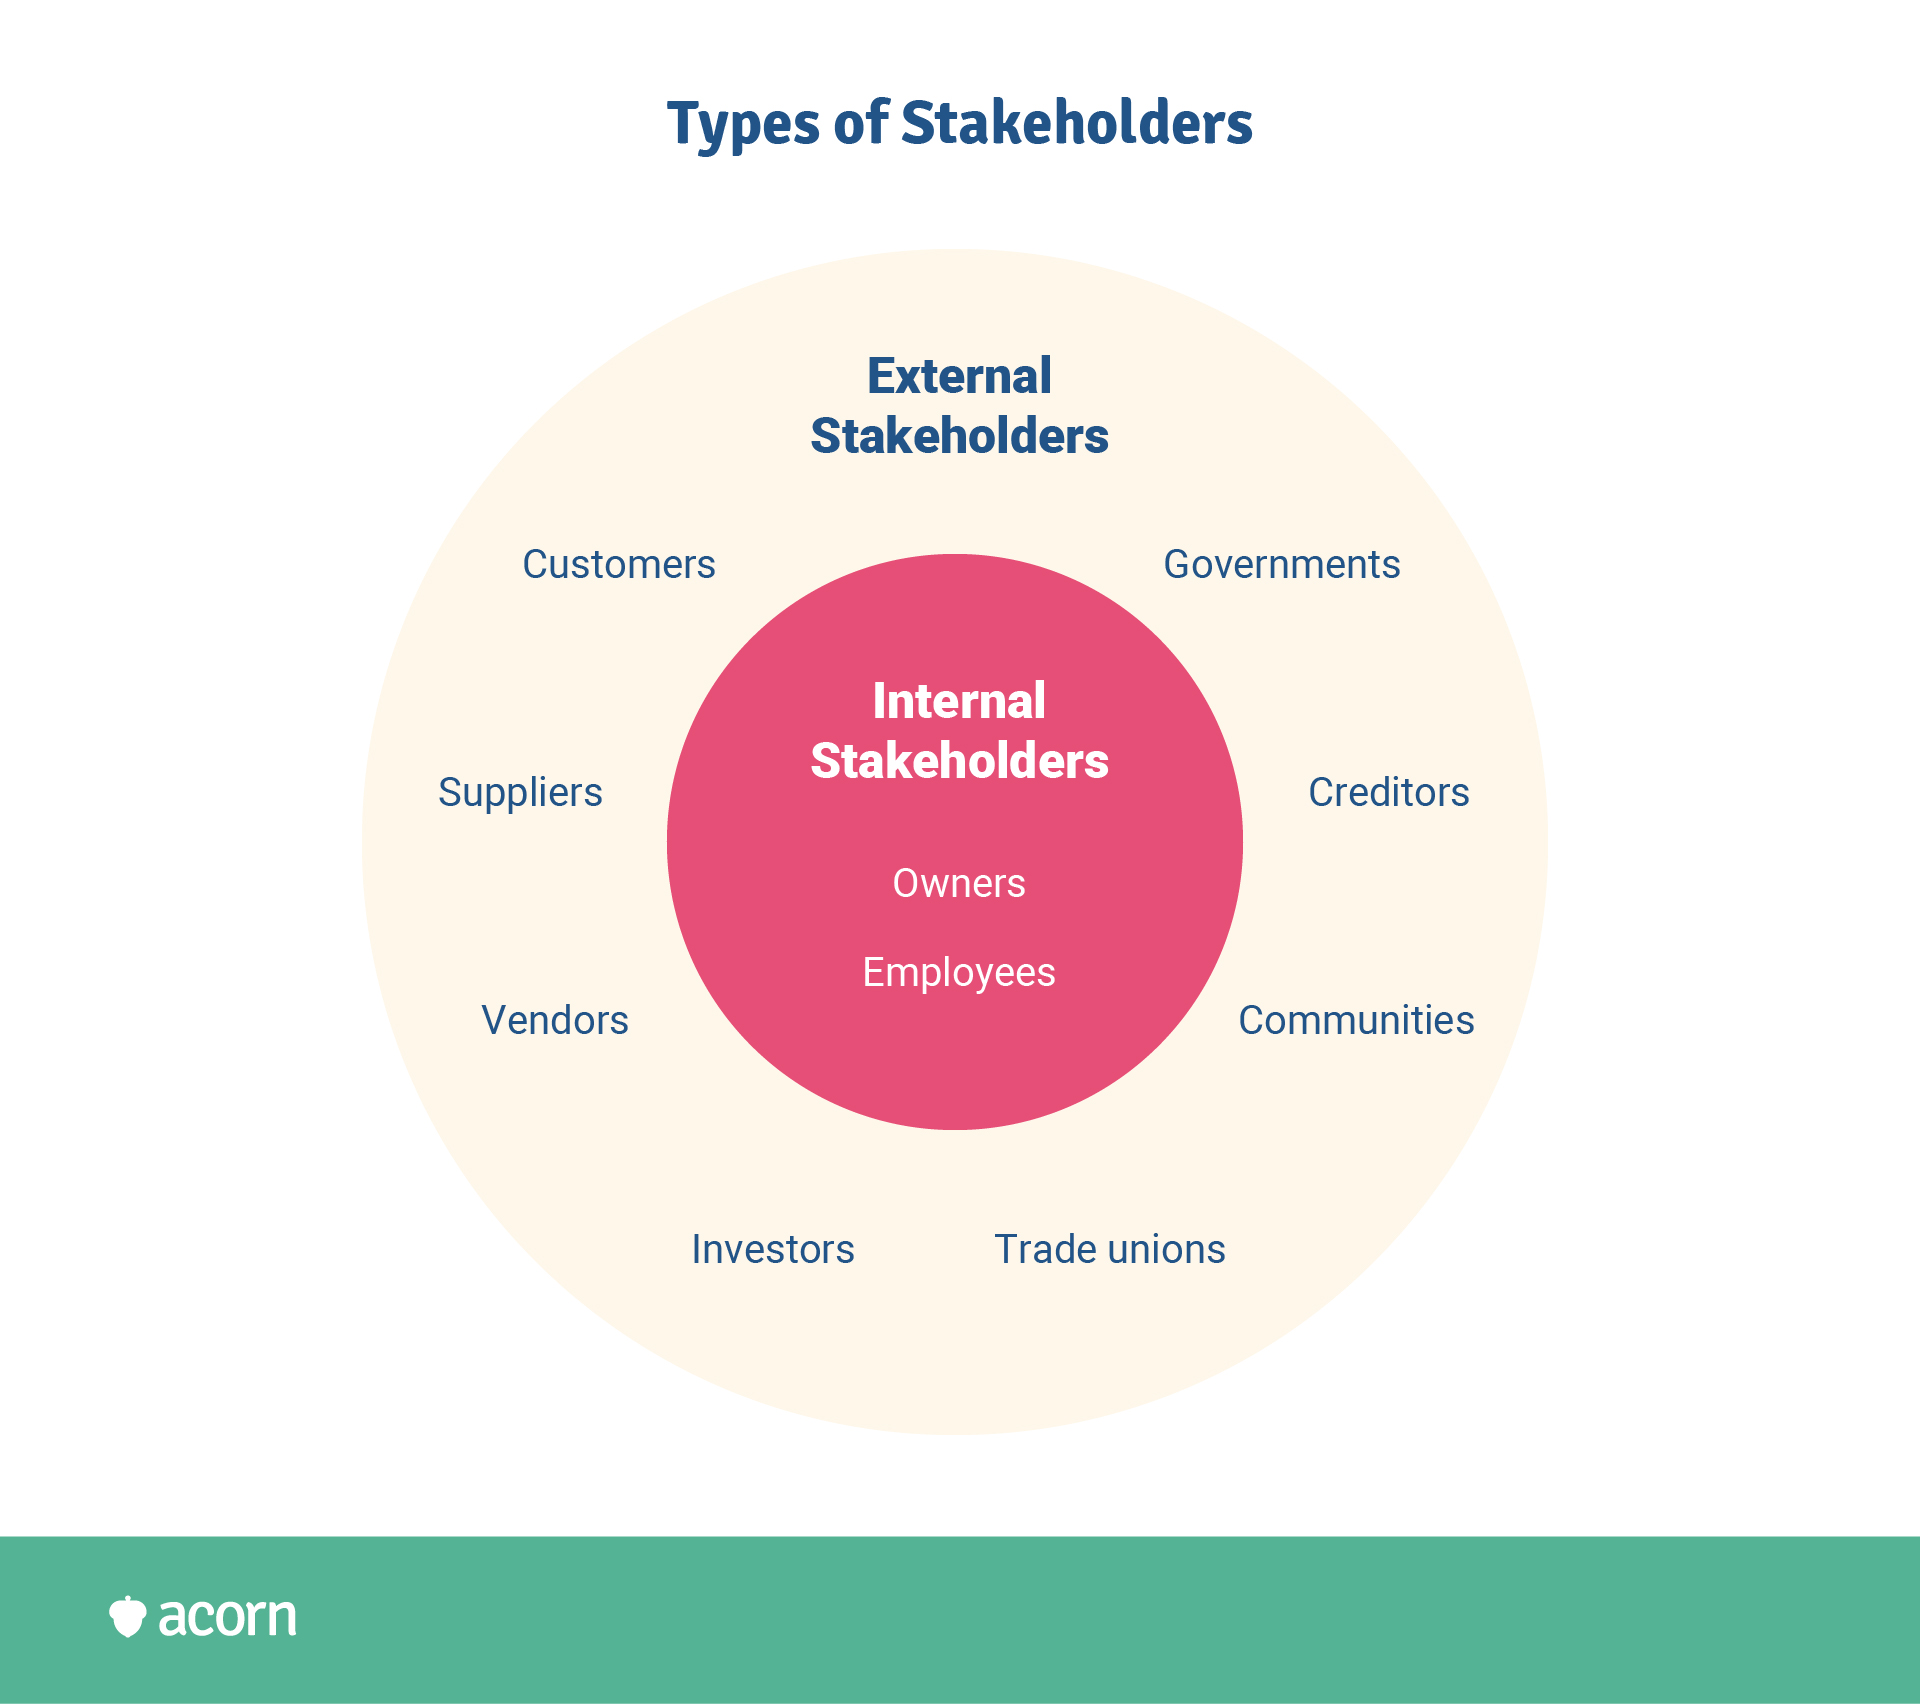 Types of internal and external stakeholders